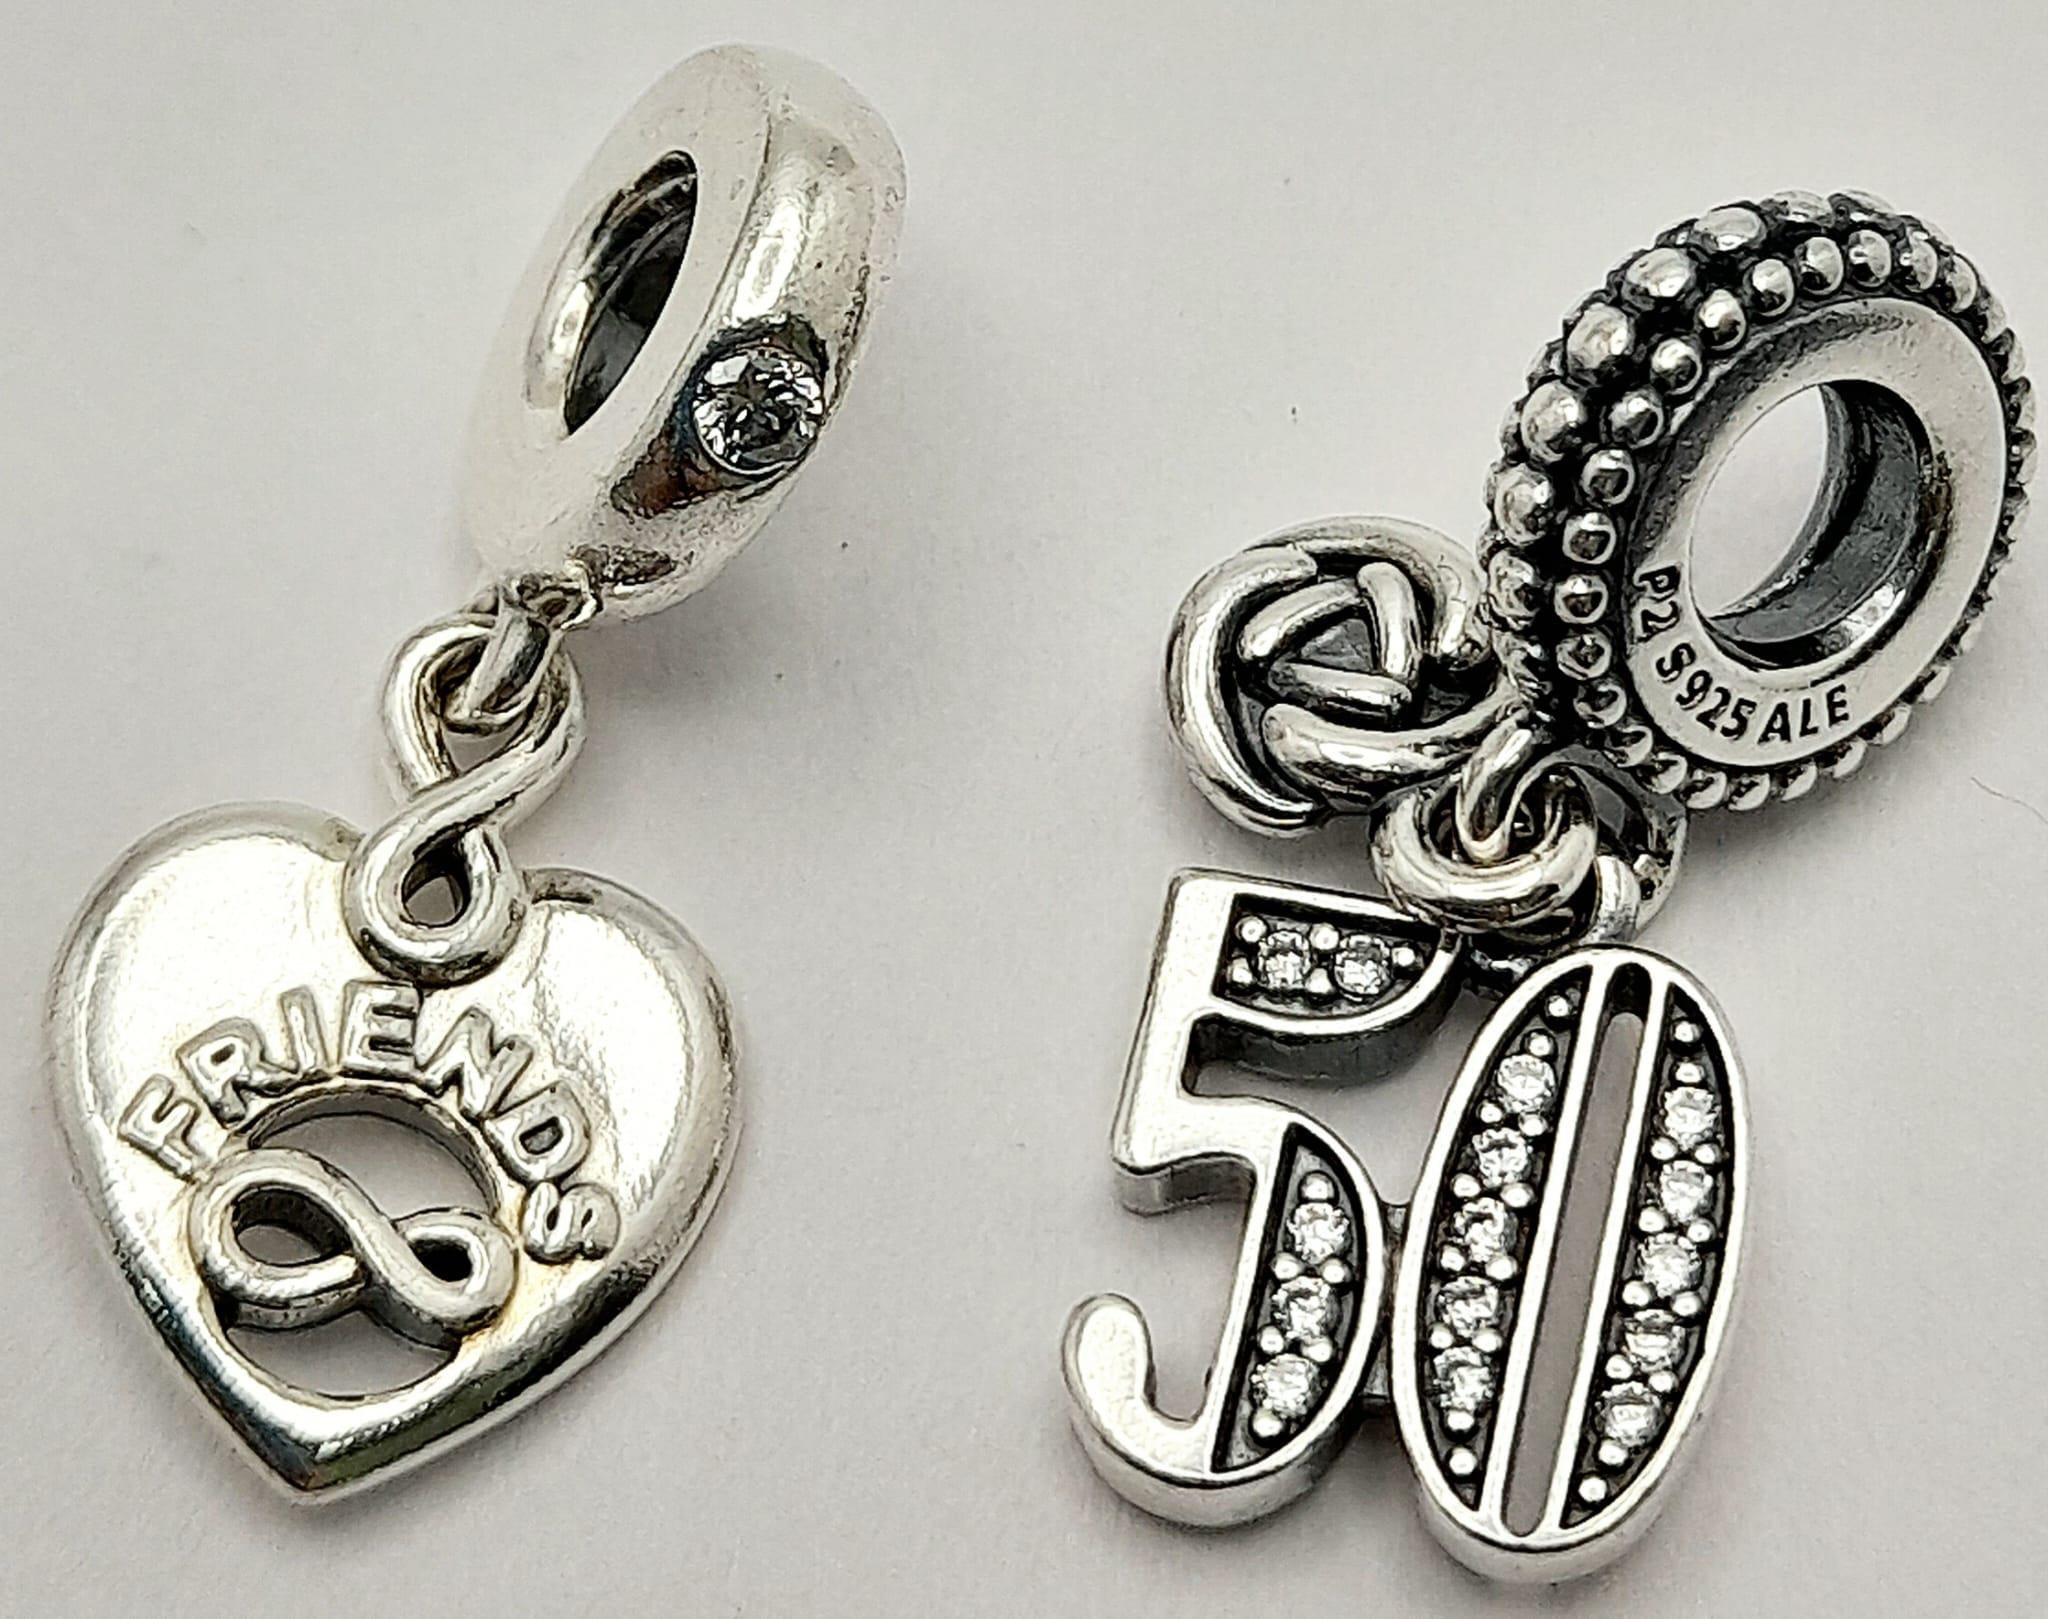 2X fancy Pandora 925 silver charms/pendants include a "Friend Forever" heart and a silver stone